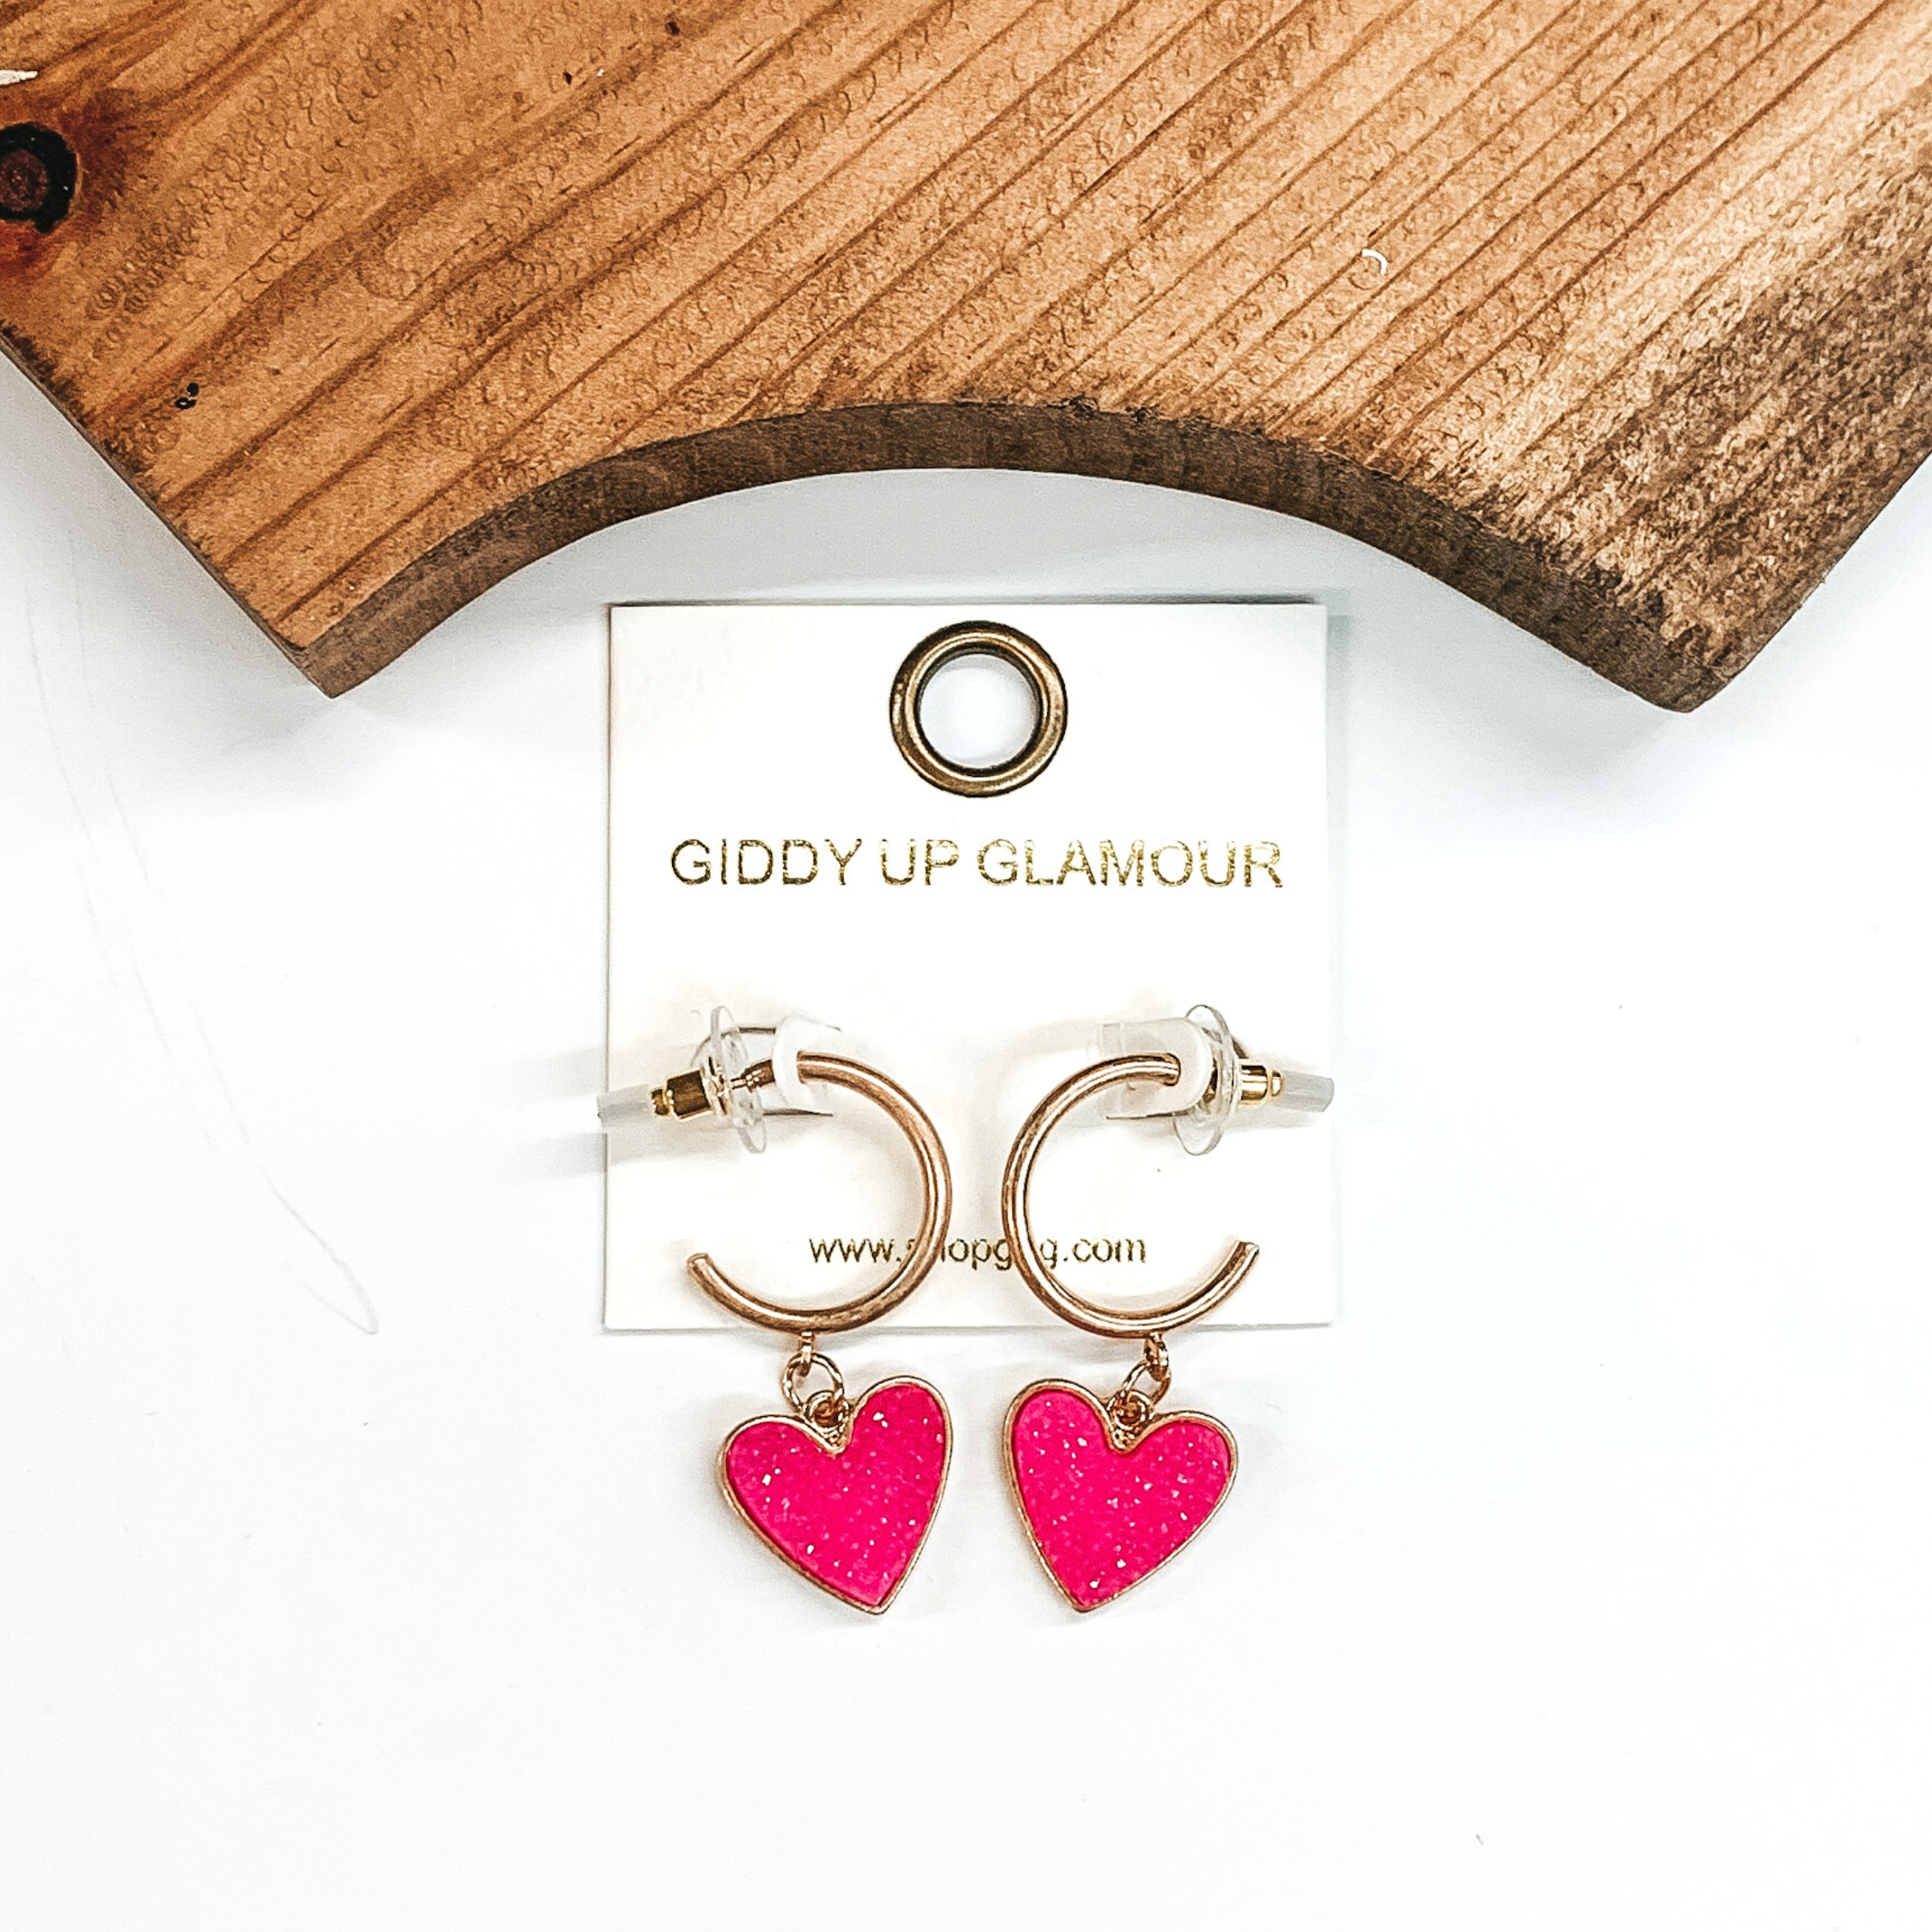 Gold hoop earrings with a neon pink druzy heart charm at the bottom of the hoop. These earring are pictured on a white background with a piece of wood pictured at the top of the picture.